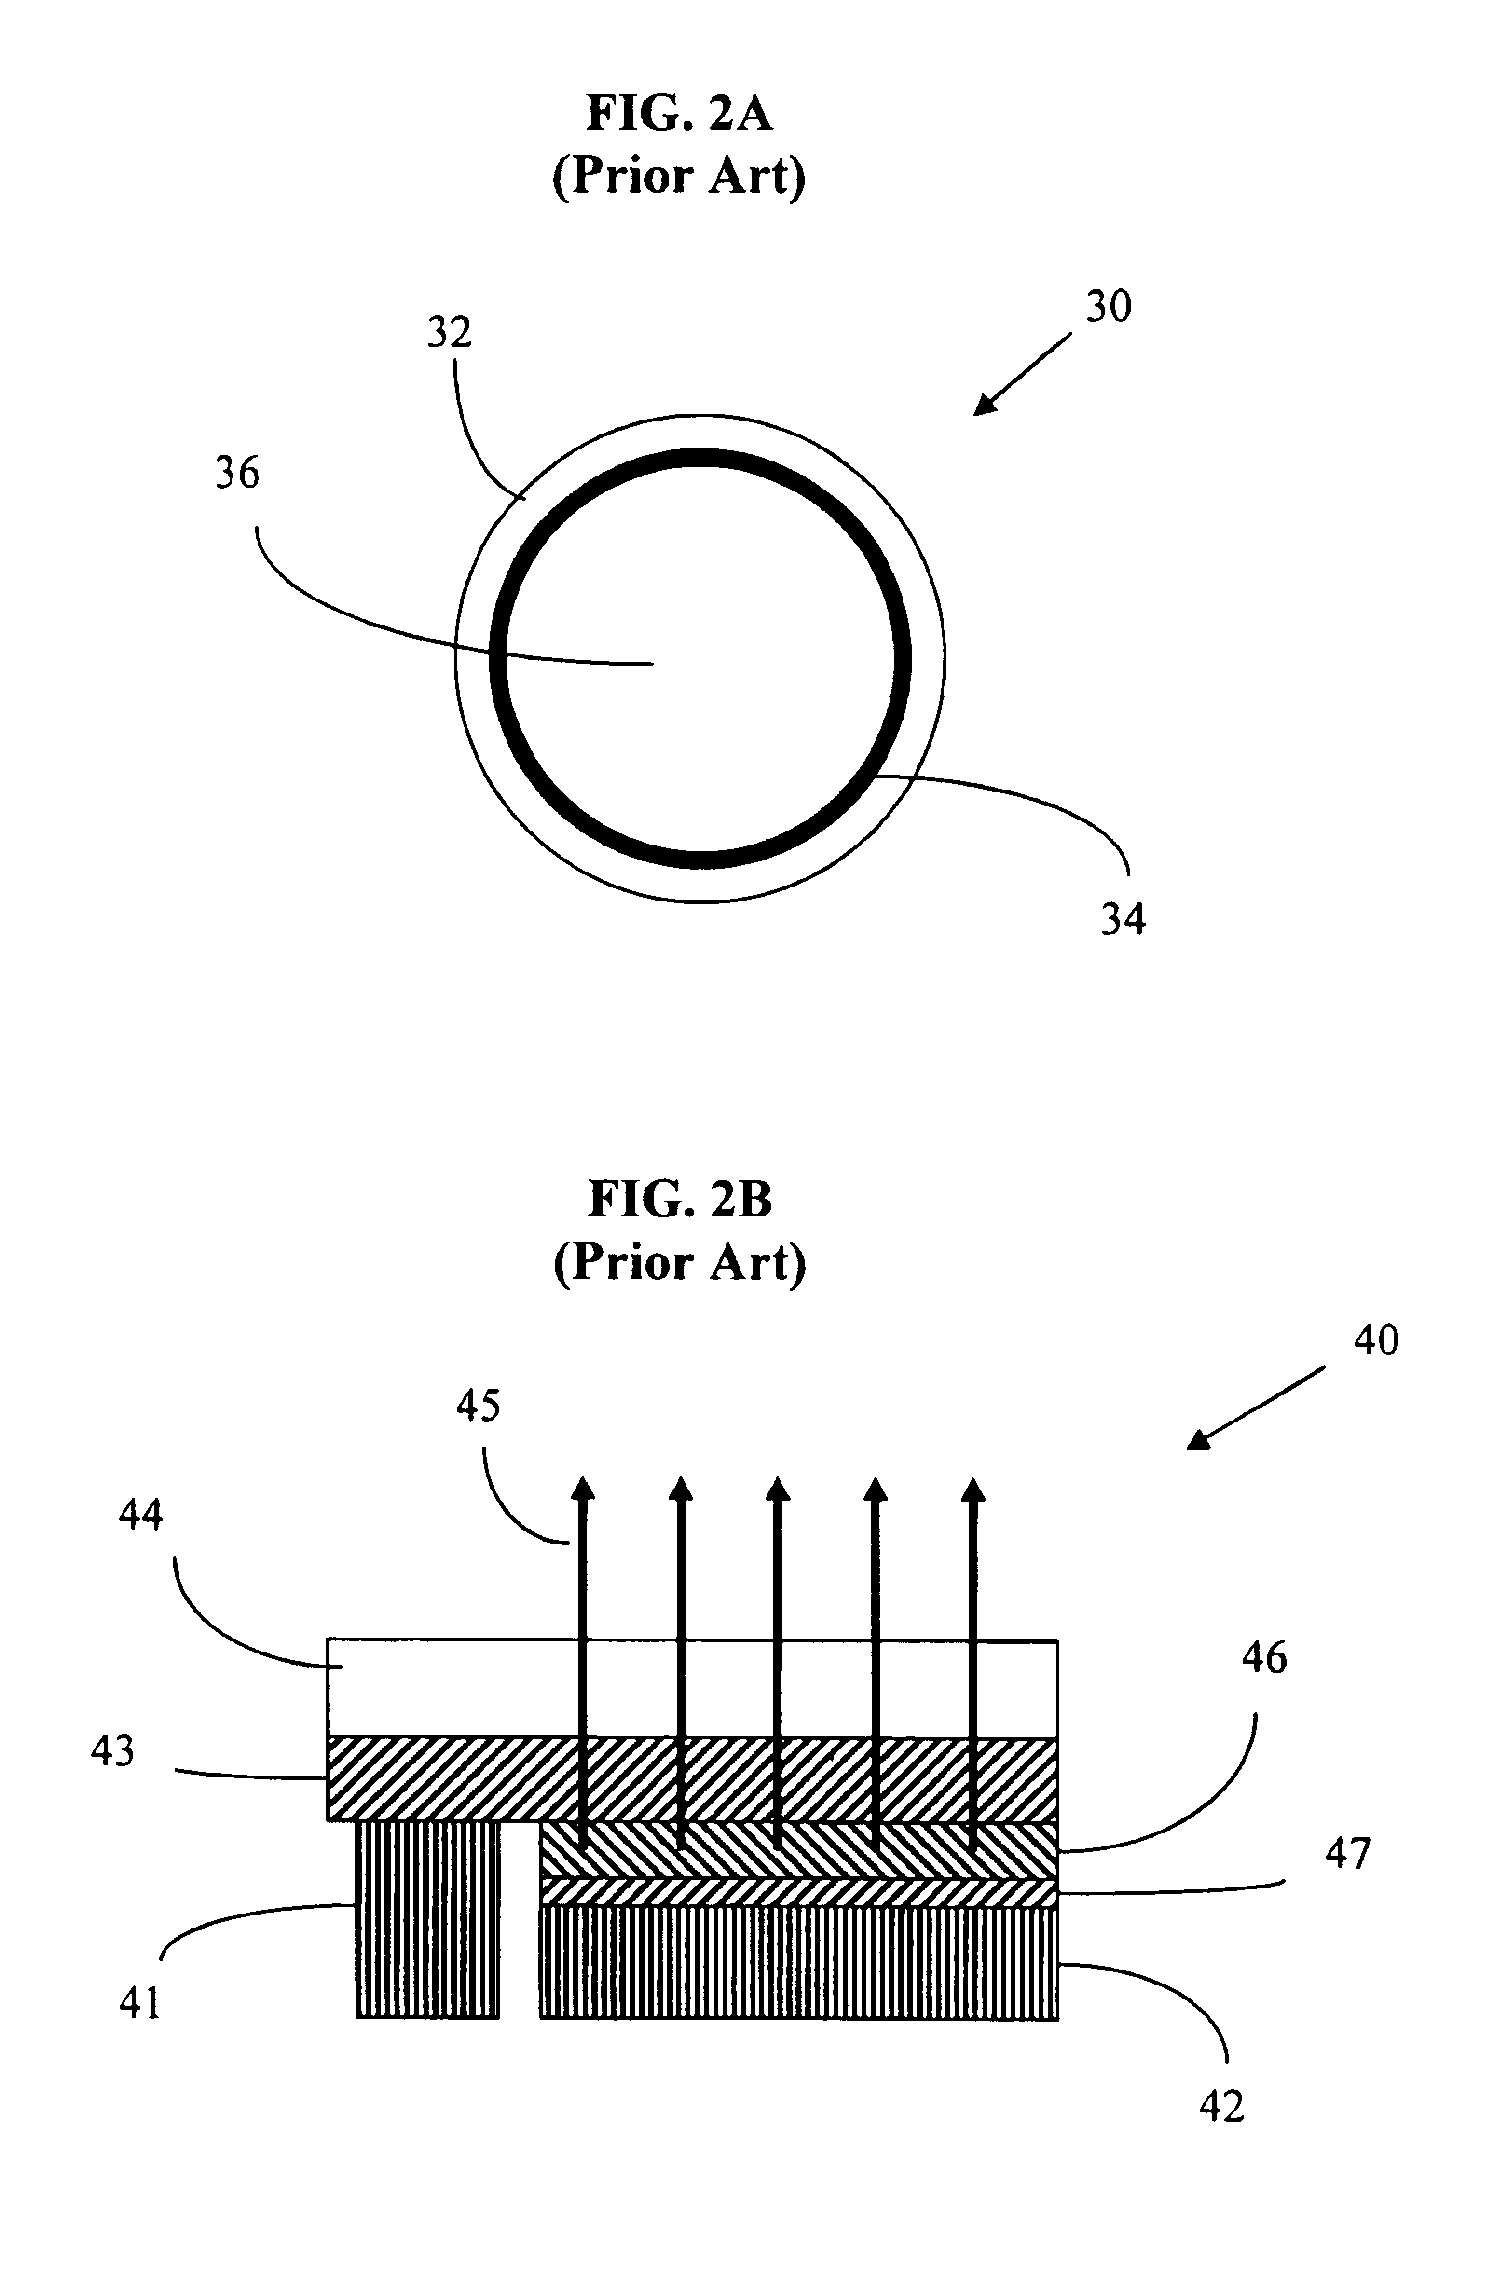 Illumination systems utilizing light emitting diodes and light recycling to enhance output radiance